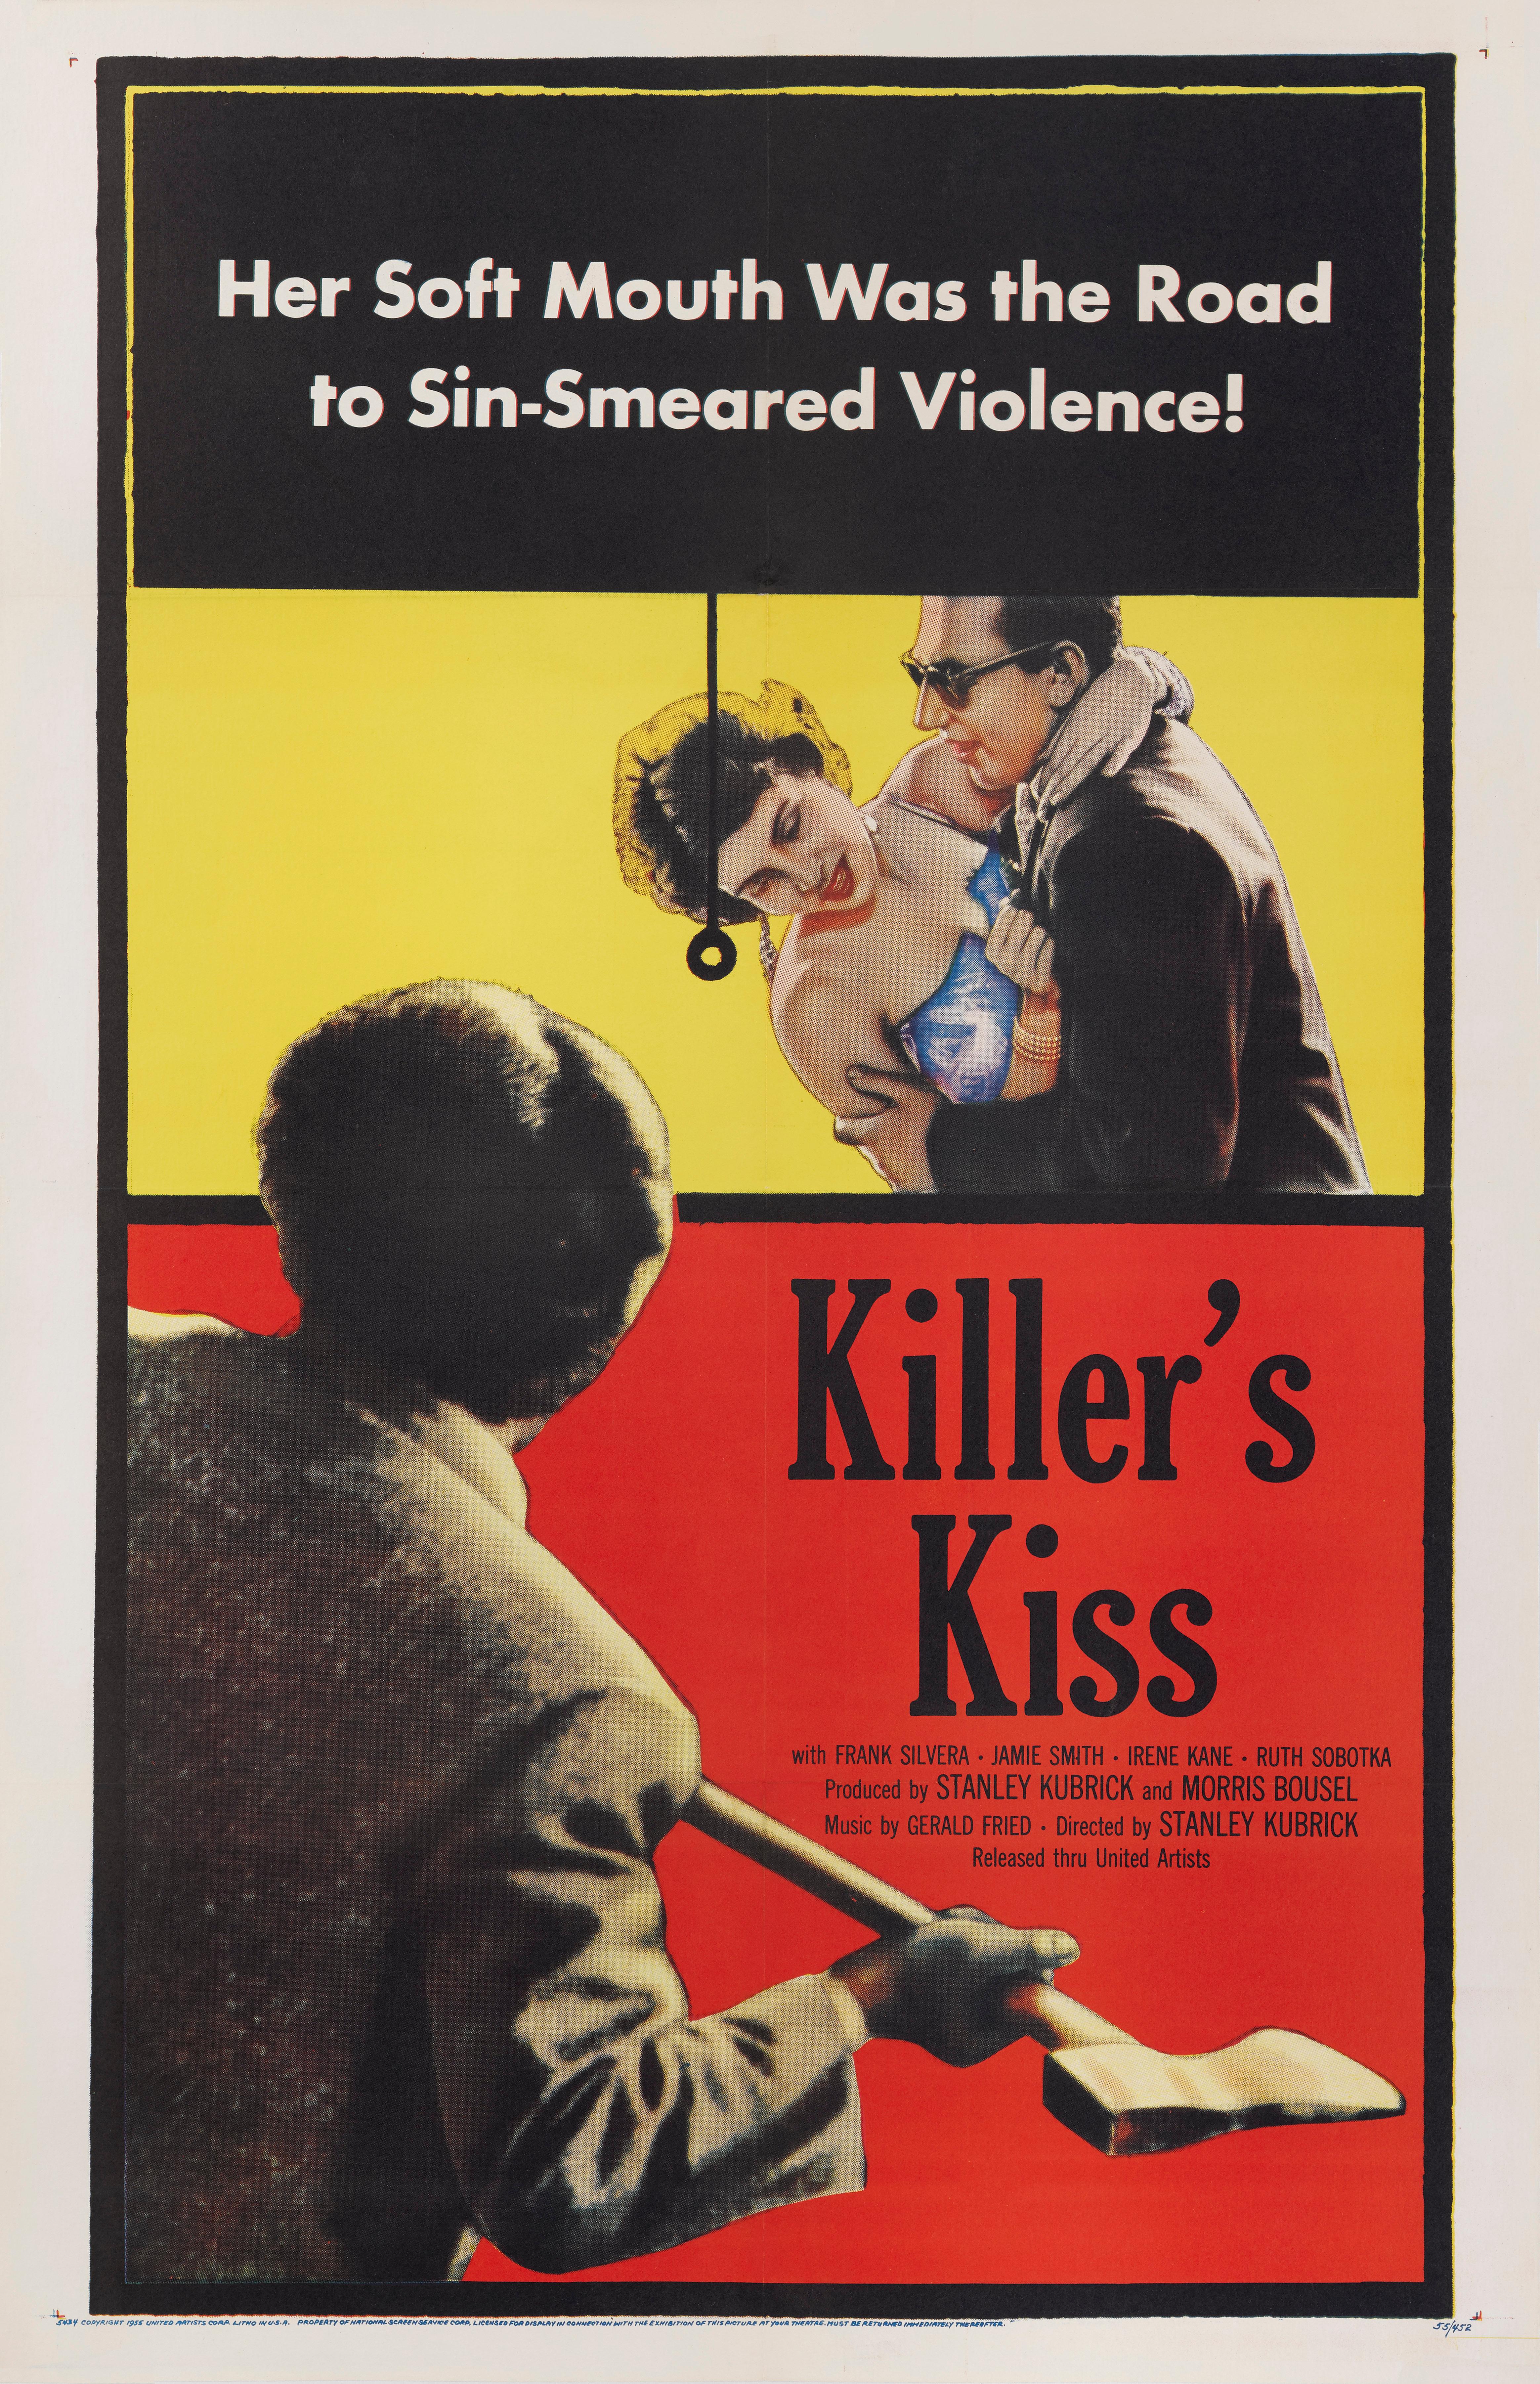 Original US film poster for Stanley Kubrick's 1955 Film Noir.
The film starred Frank Silvera and Jamie Smith.
This poster is conservation linen backed and would be shipped rolled in a strong tube.